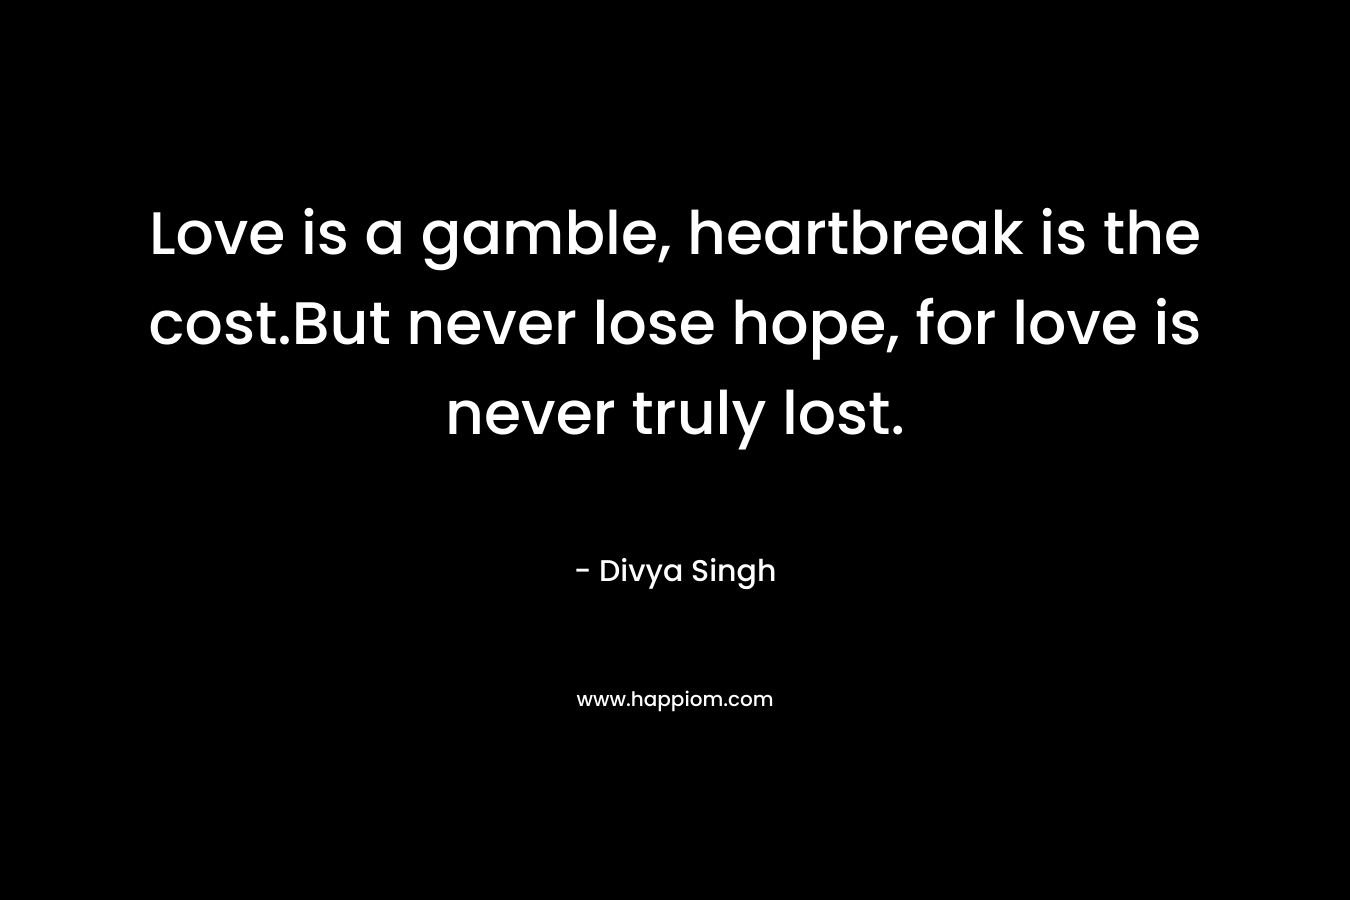 Love is a gamble, heartbreak is the cost.But never lose hope, for love is never truly lost.